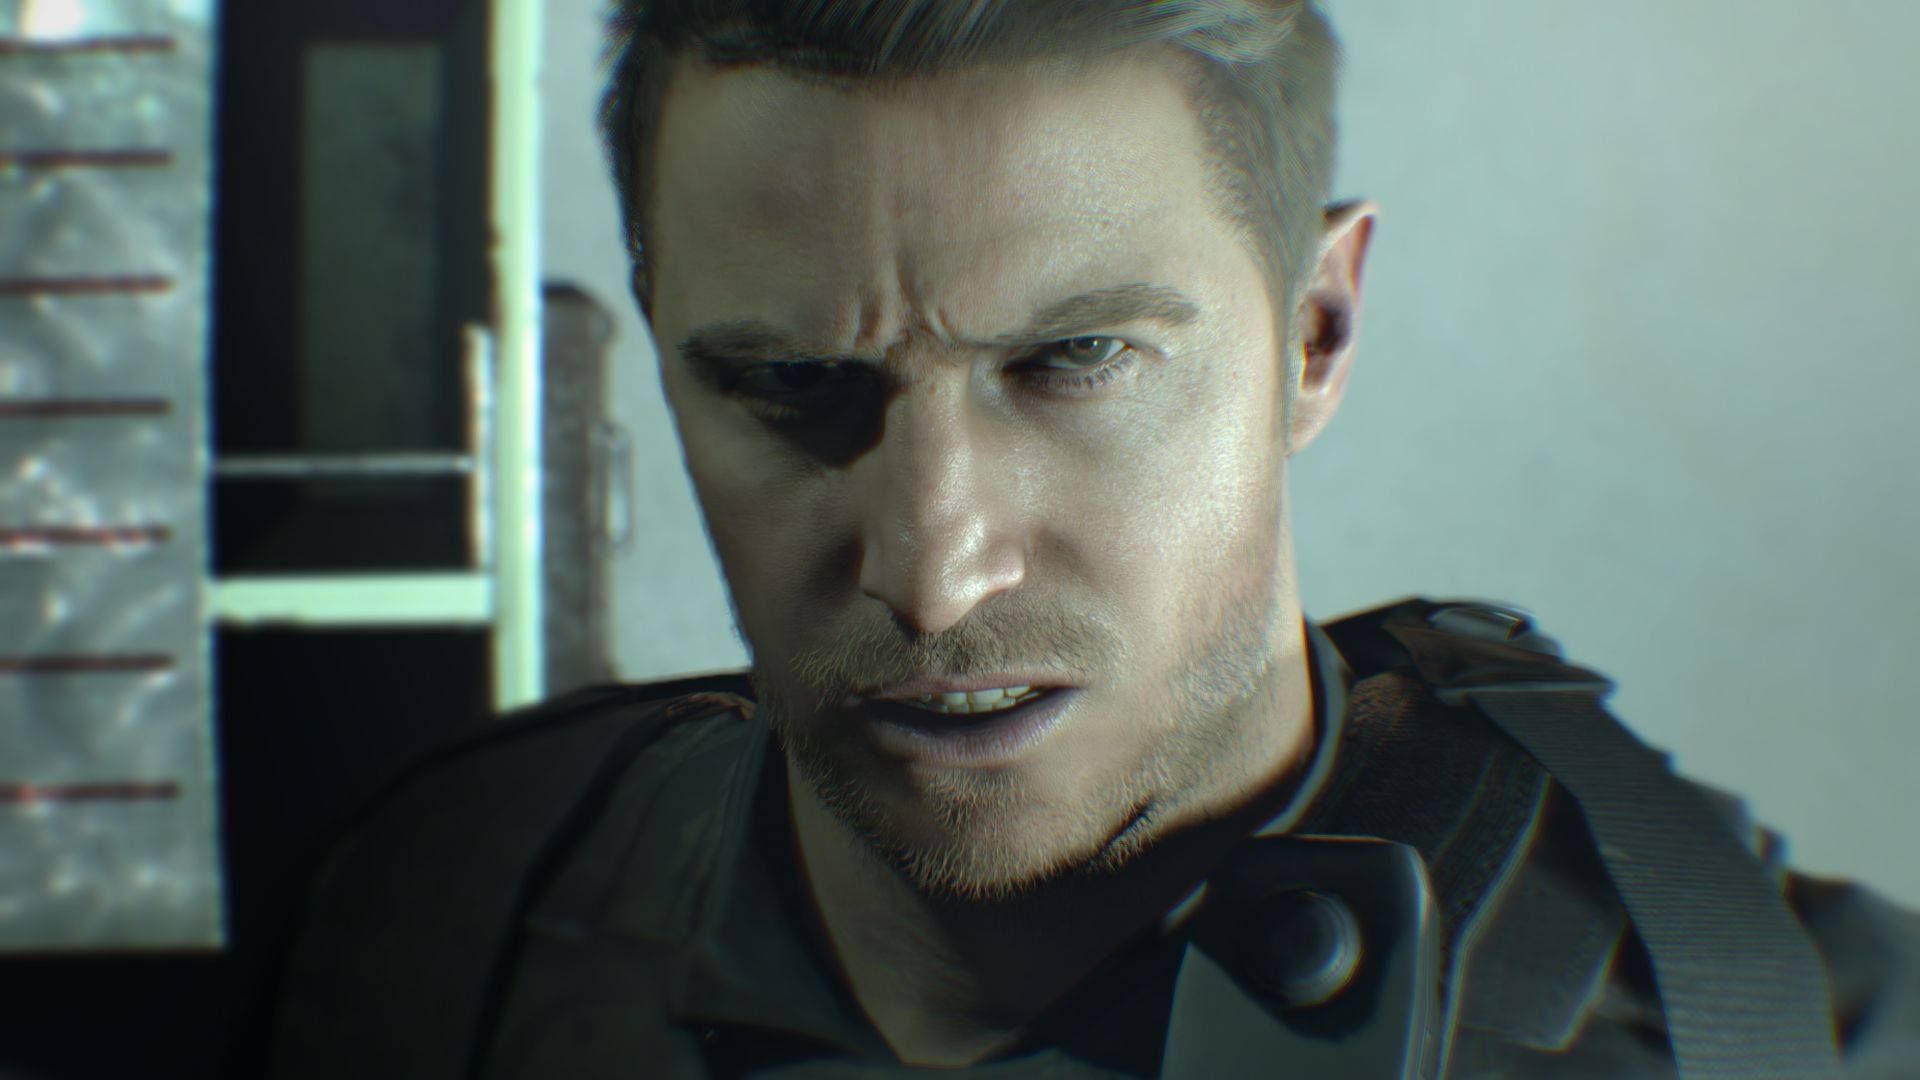 resident-evil-7-free-not-a-hero-dlc-has-been-delayed